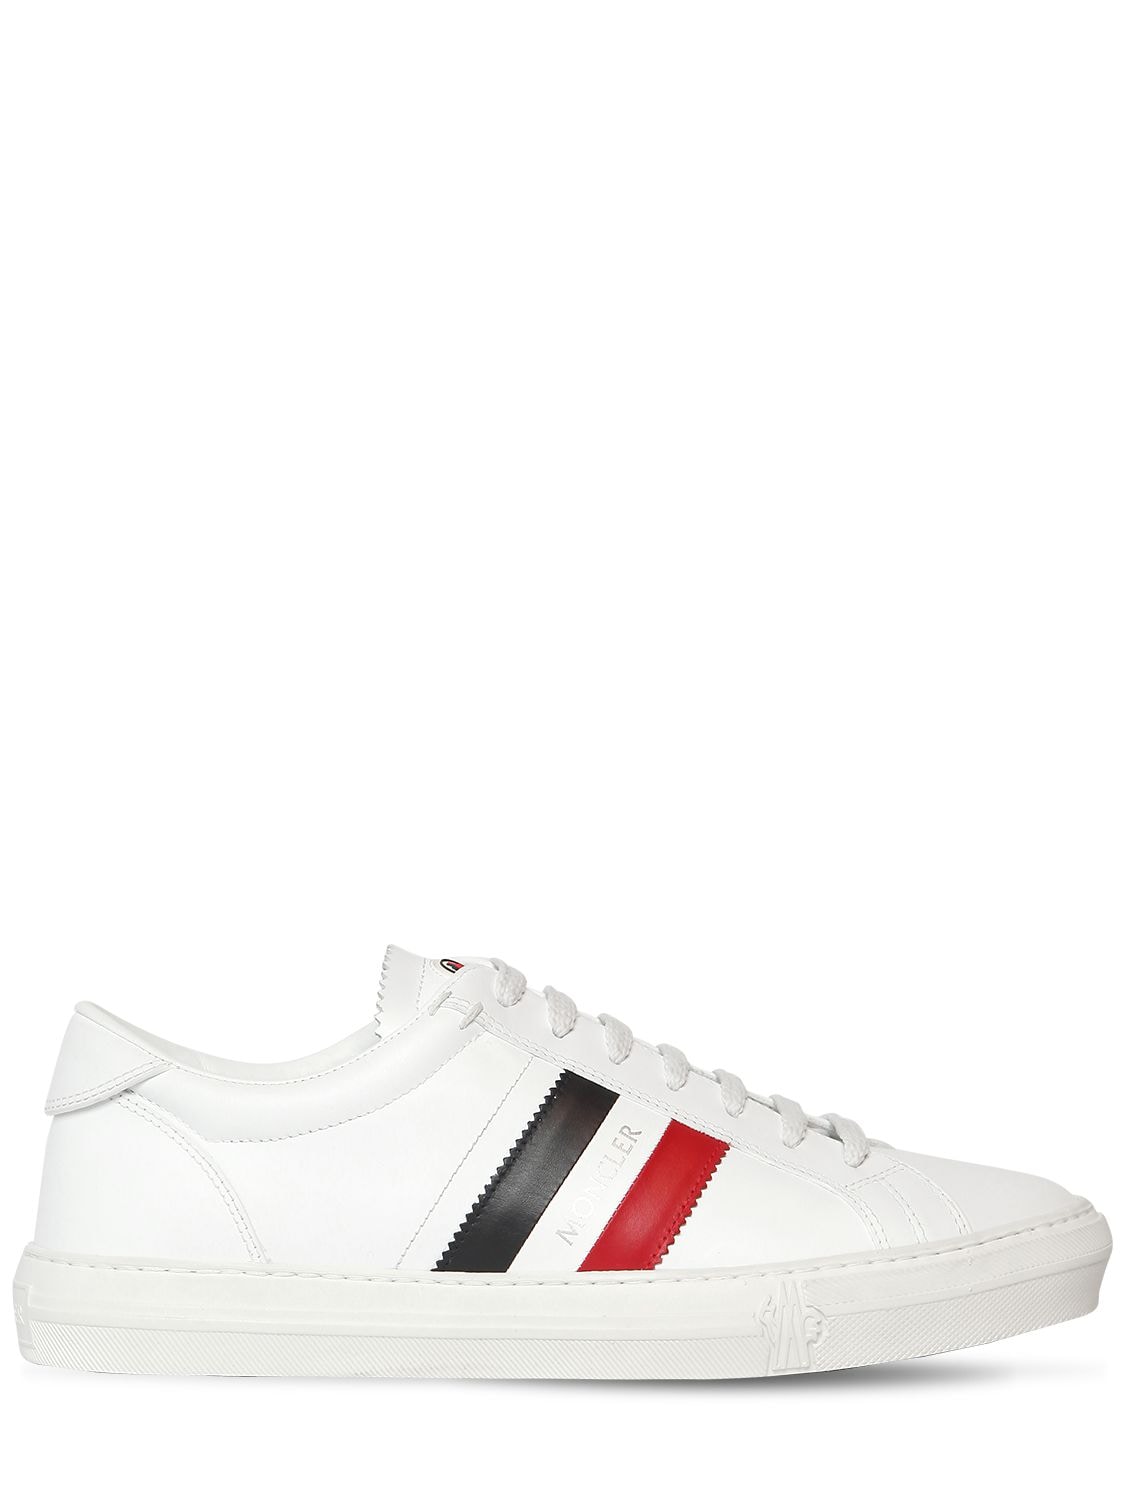 MONCLER NEW MONACO LEATHER trainers,72I0T9010-MDAY0